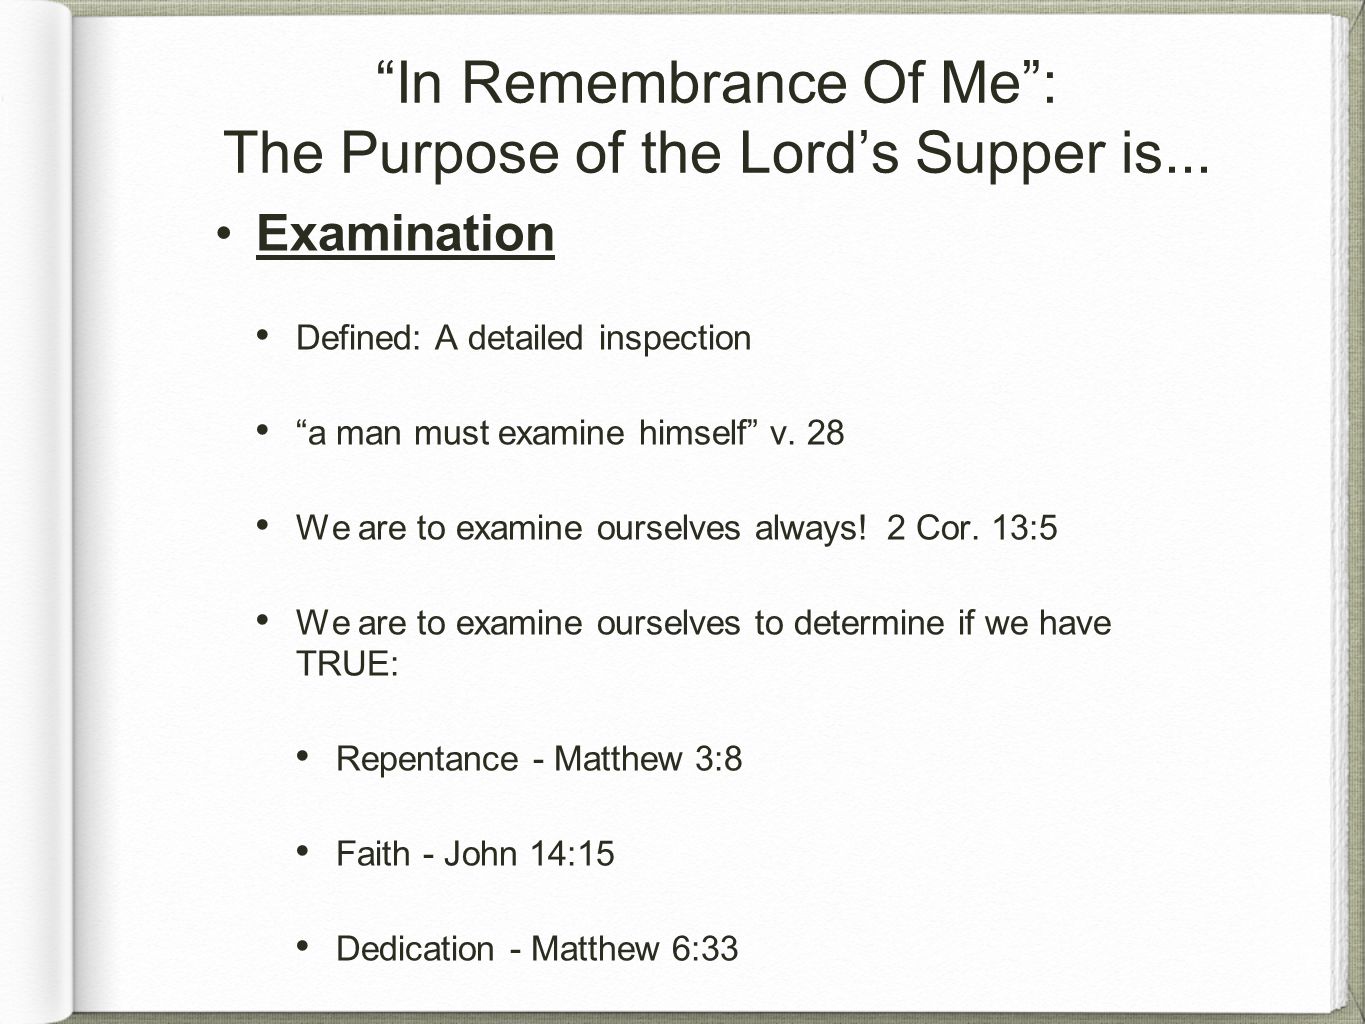 In Remembrance Of Me : The Purpose of the Lord’s Supper is...